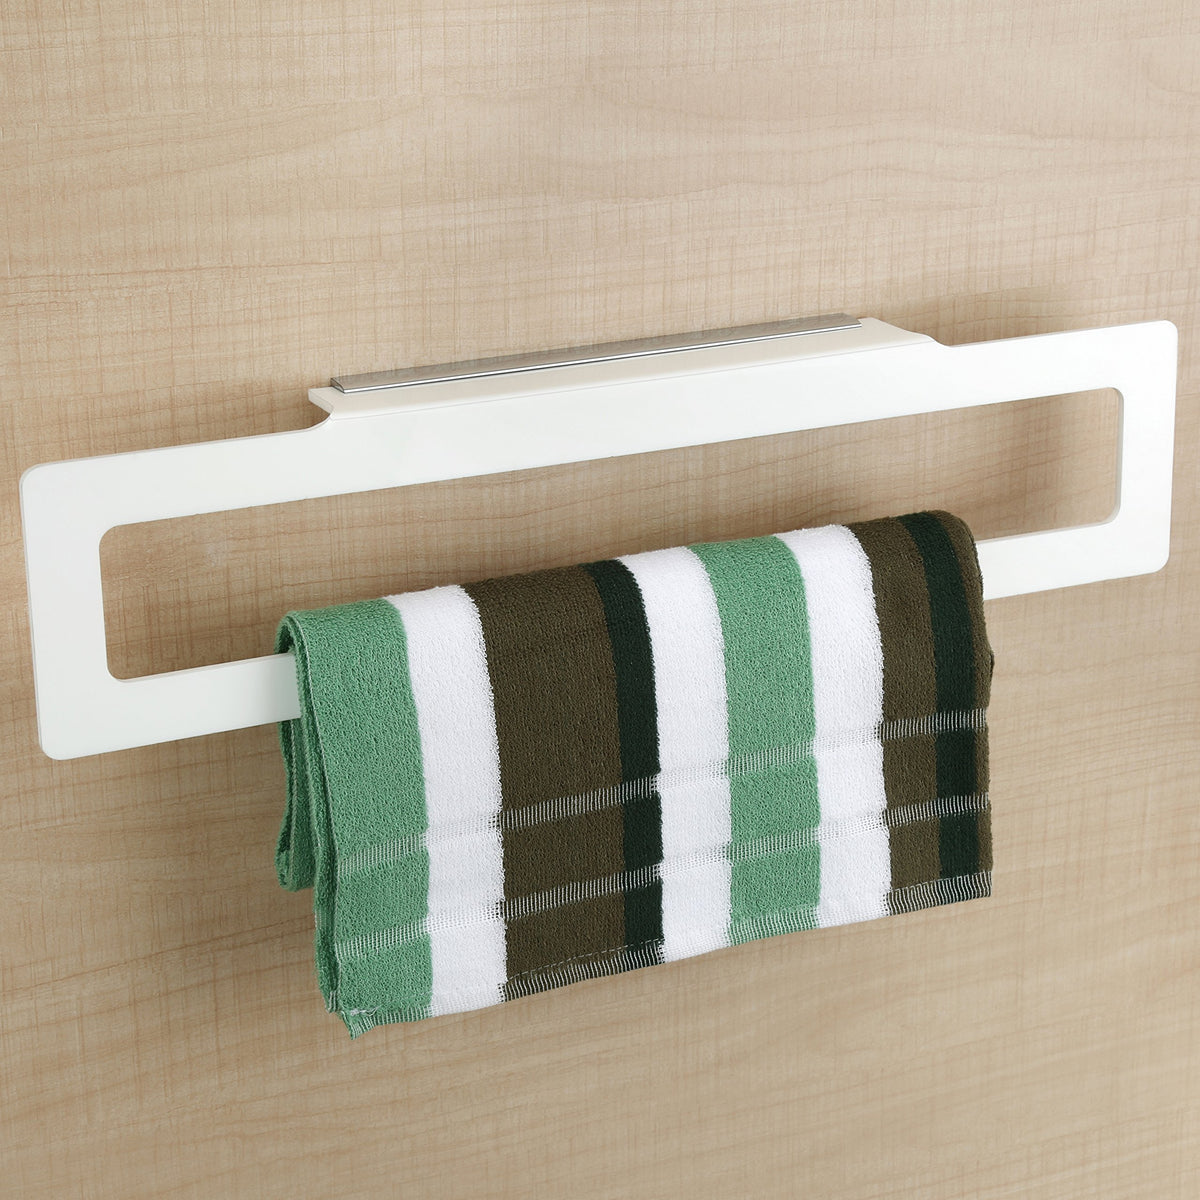 Plantex Acrylic Towel Hanger for Bathroom/Towel Rod-Stand/Towel Bar for Wash Basin(18 Inch,Square-White)